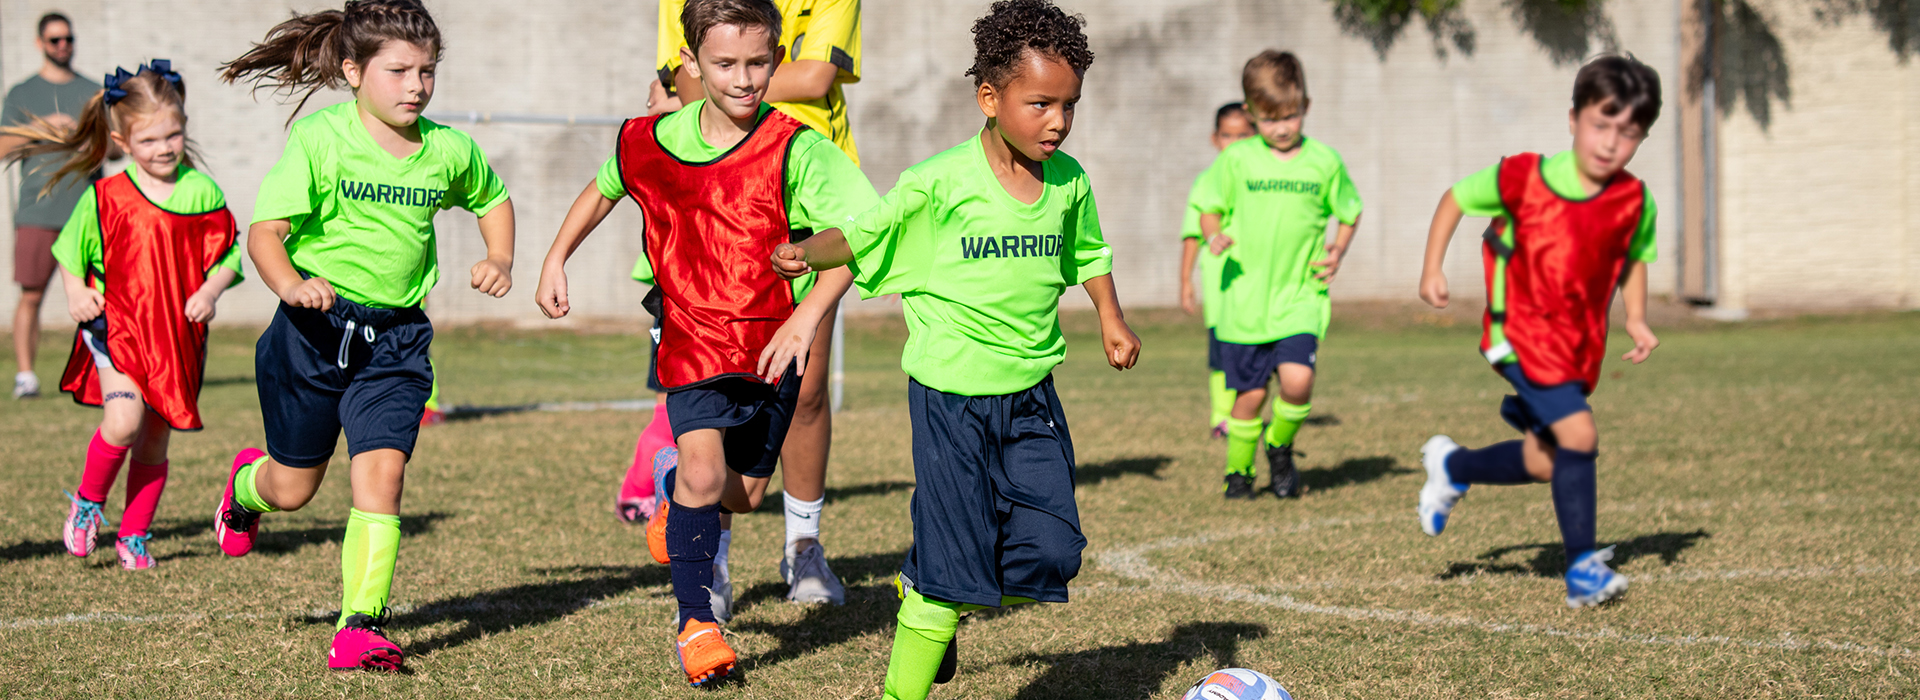 Warrior Youth Sports